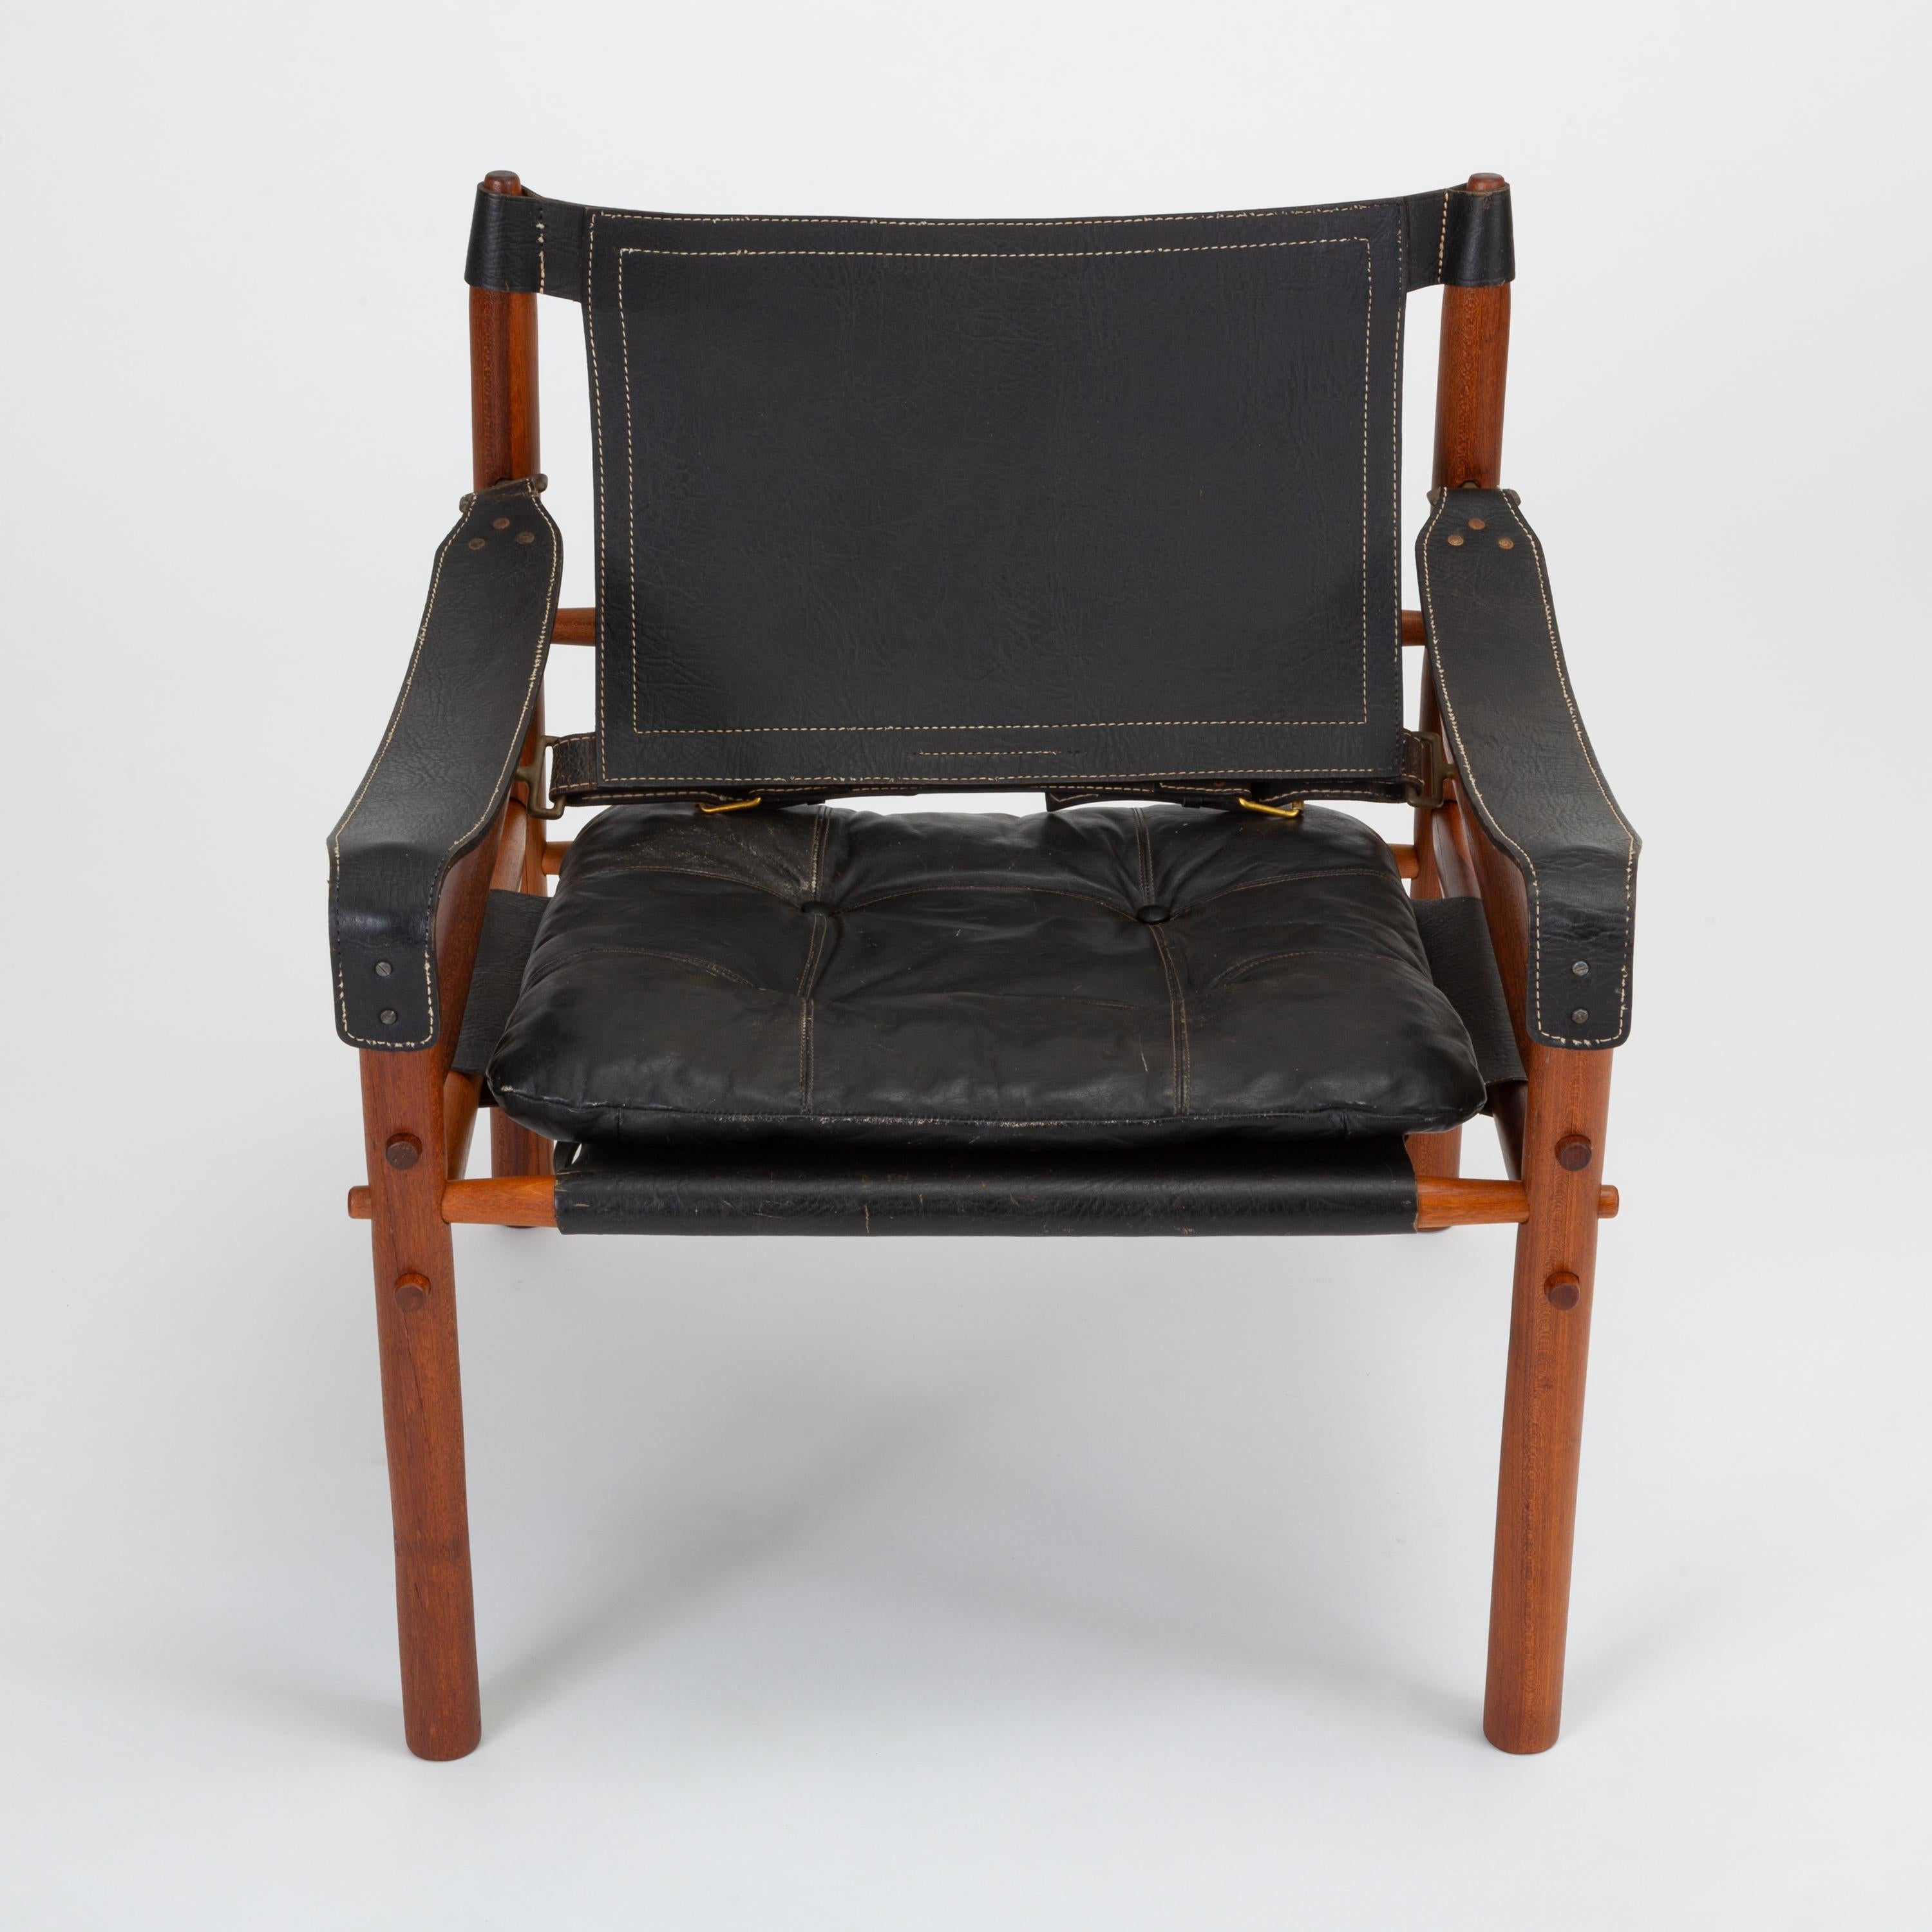 A pair of 'Sirocco' safari chair designed by Arne Norell for his eponymous company, Norell Möbel AB of Småland, Sweden. This pair features a solid teak frame strapped together by leather slings with brass fittings and black leather with contrast